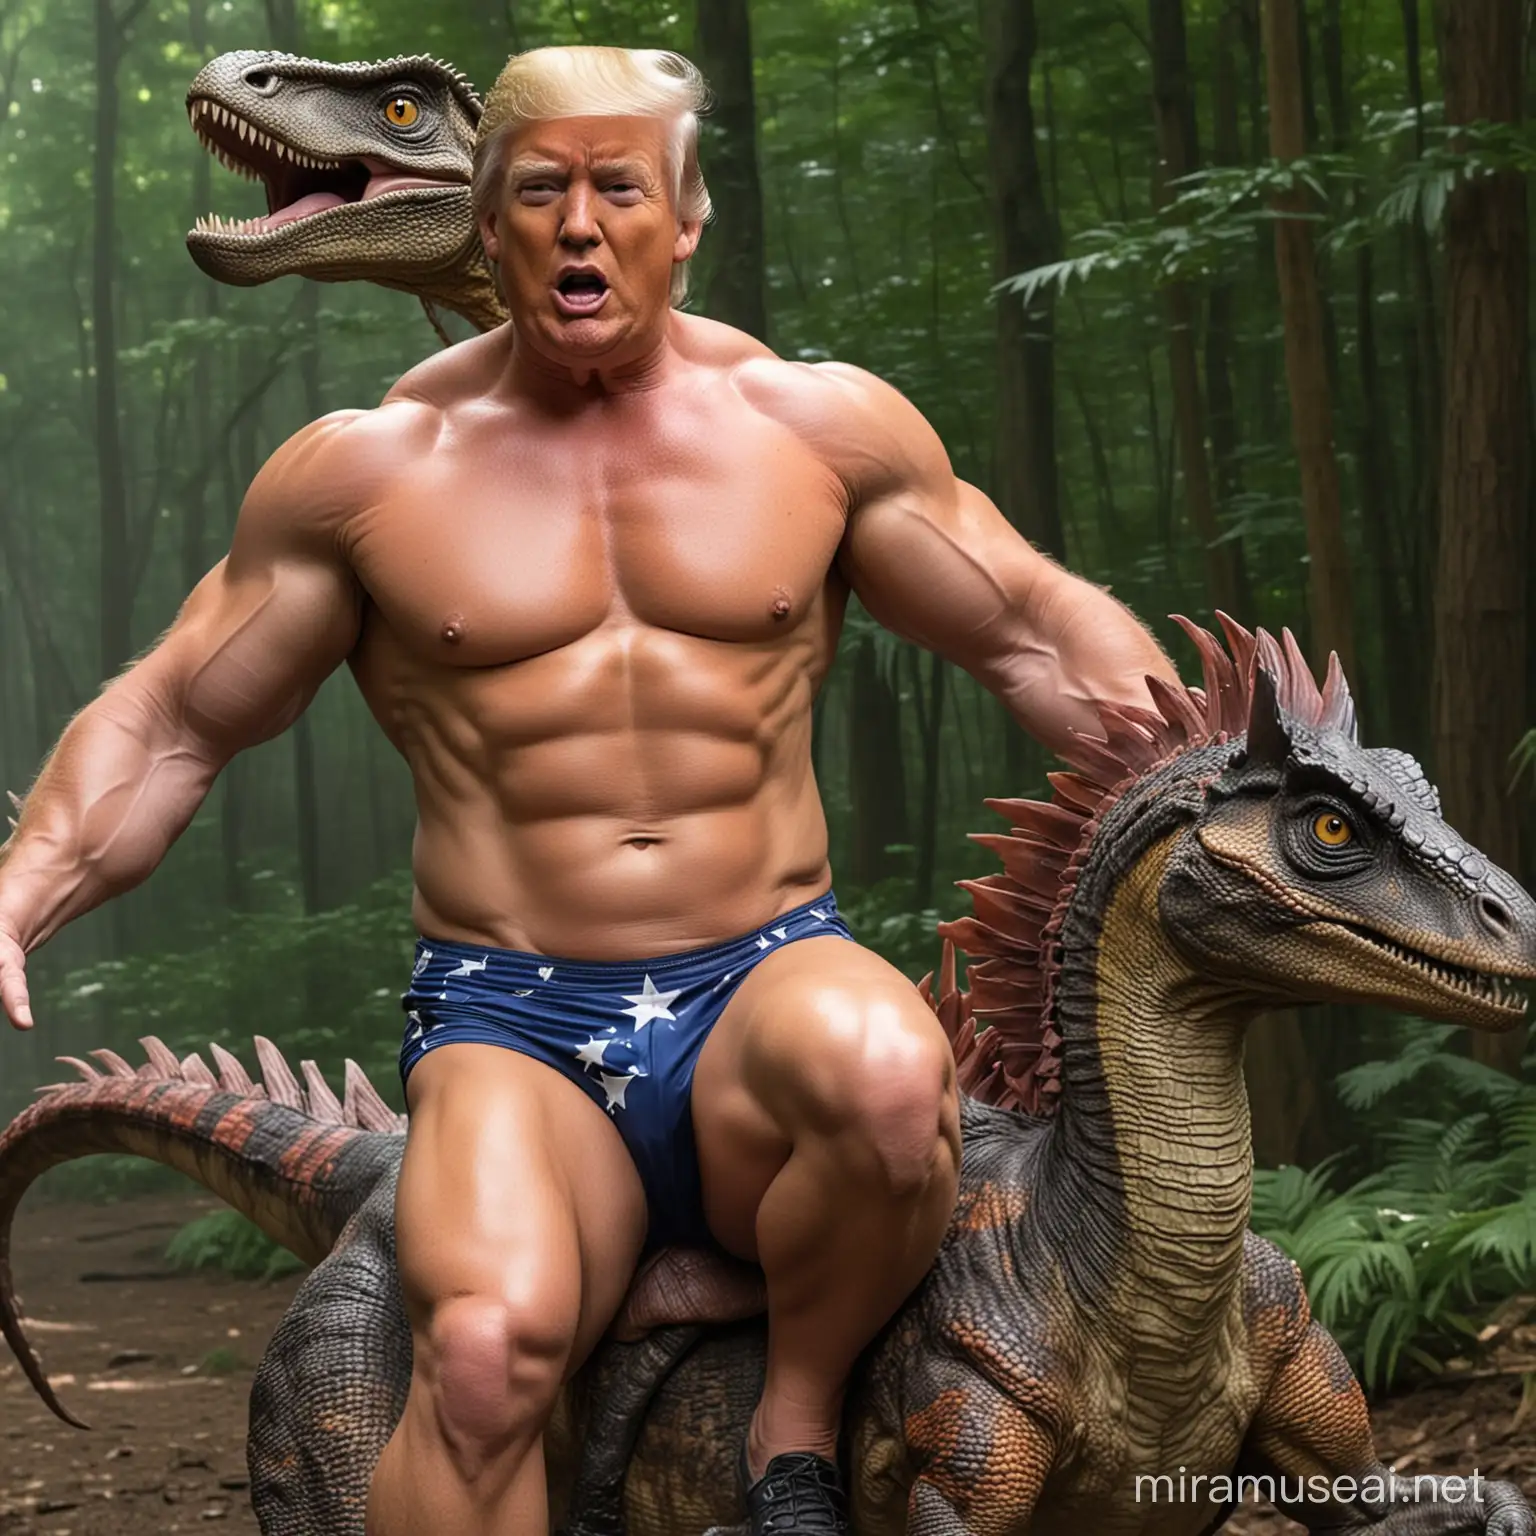 Overweight Trump Riding a Velociraptor Humorous Illustration of a Fantasy Reversed